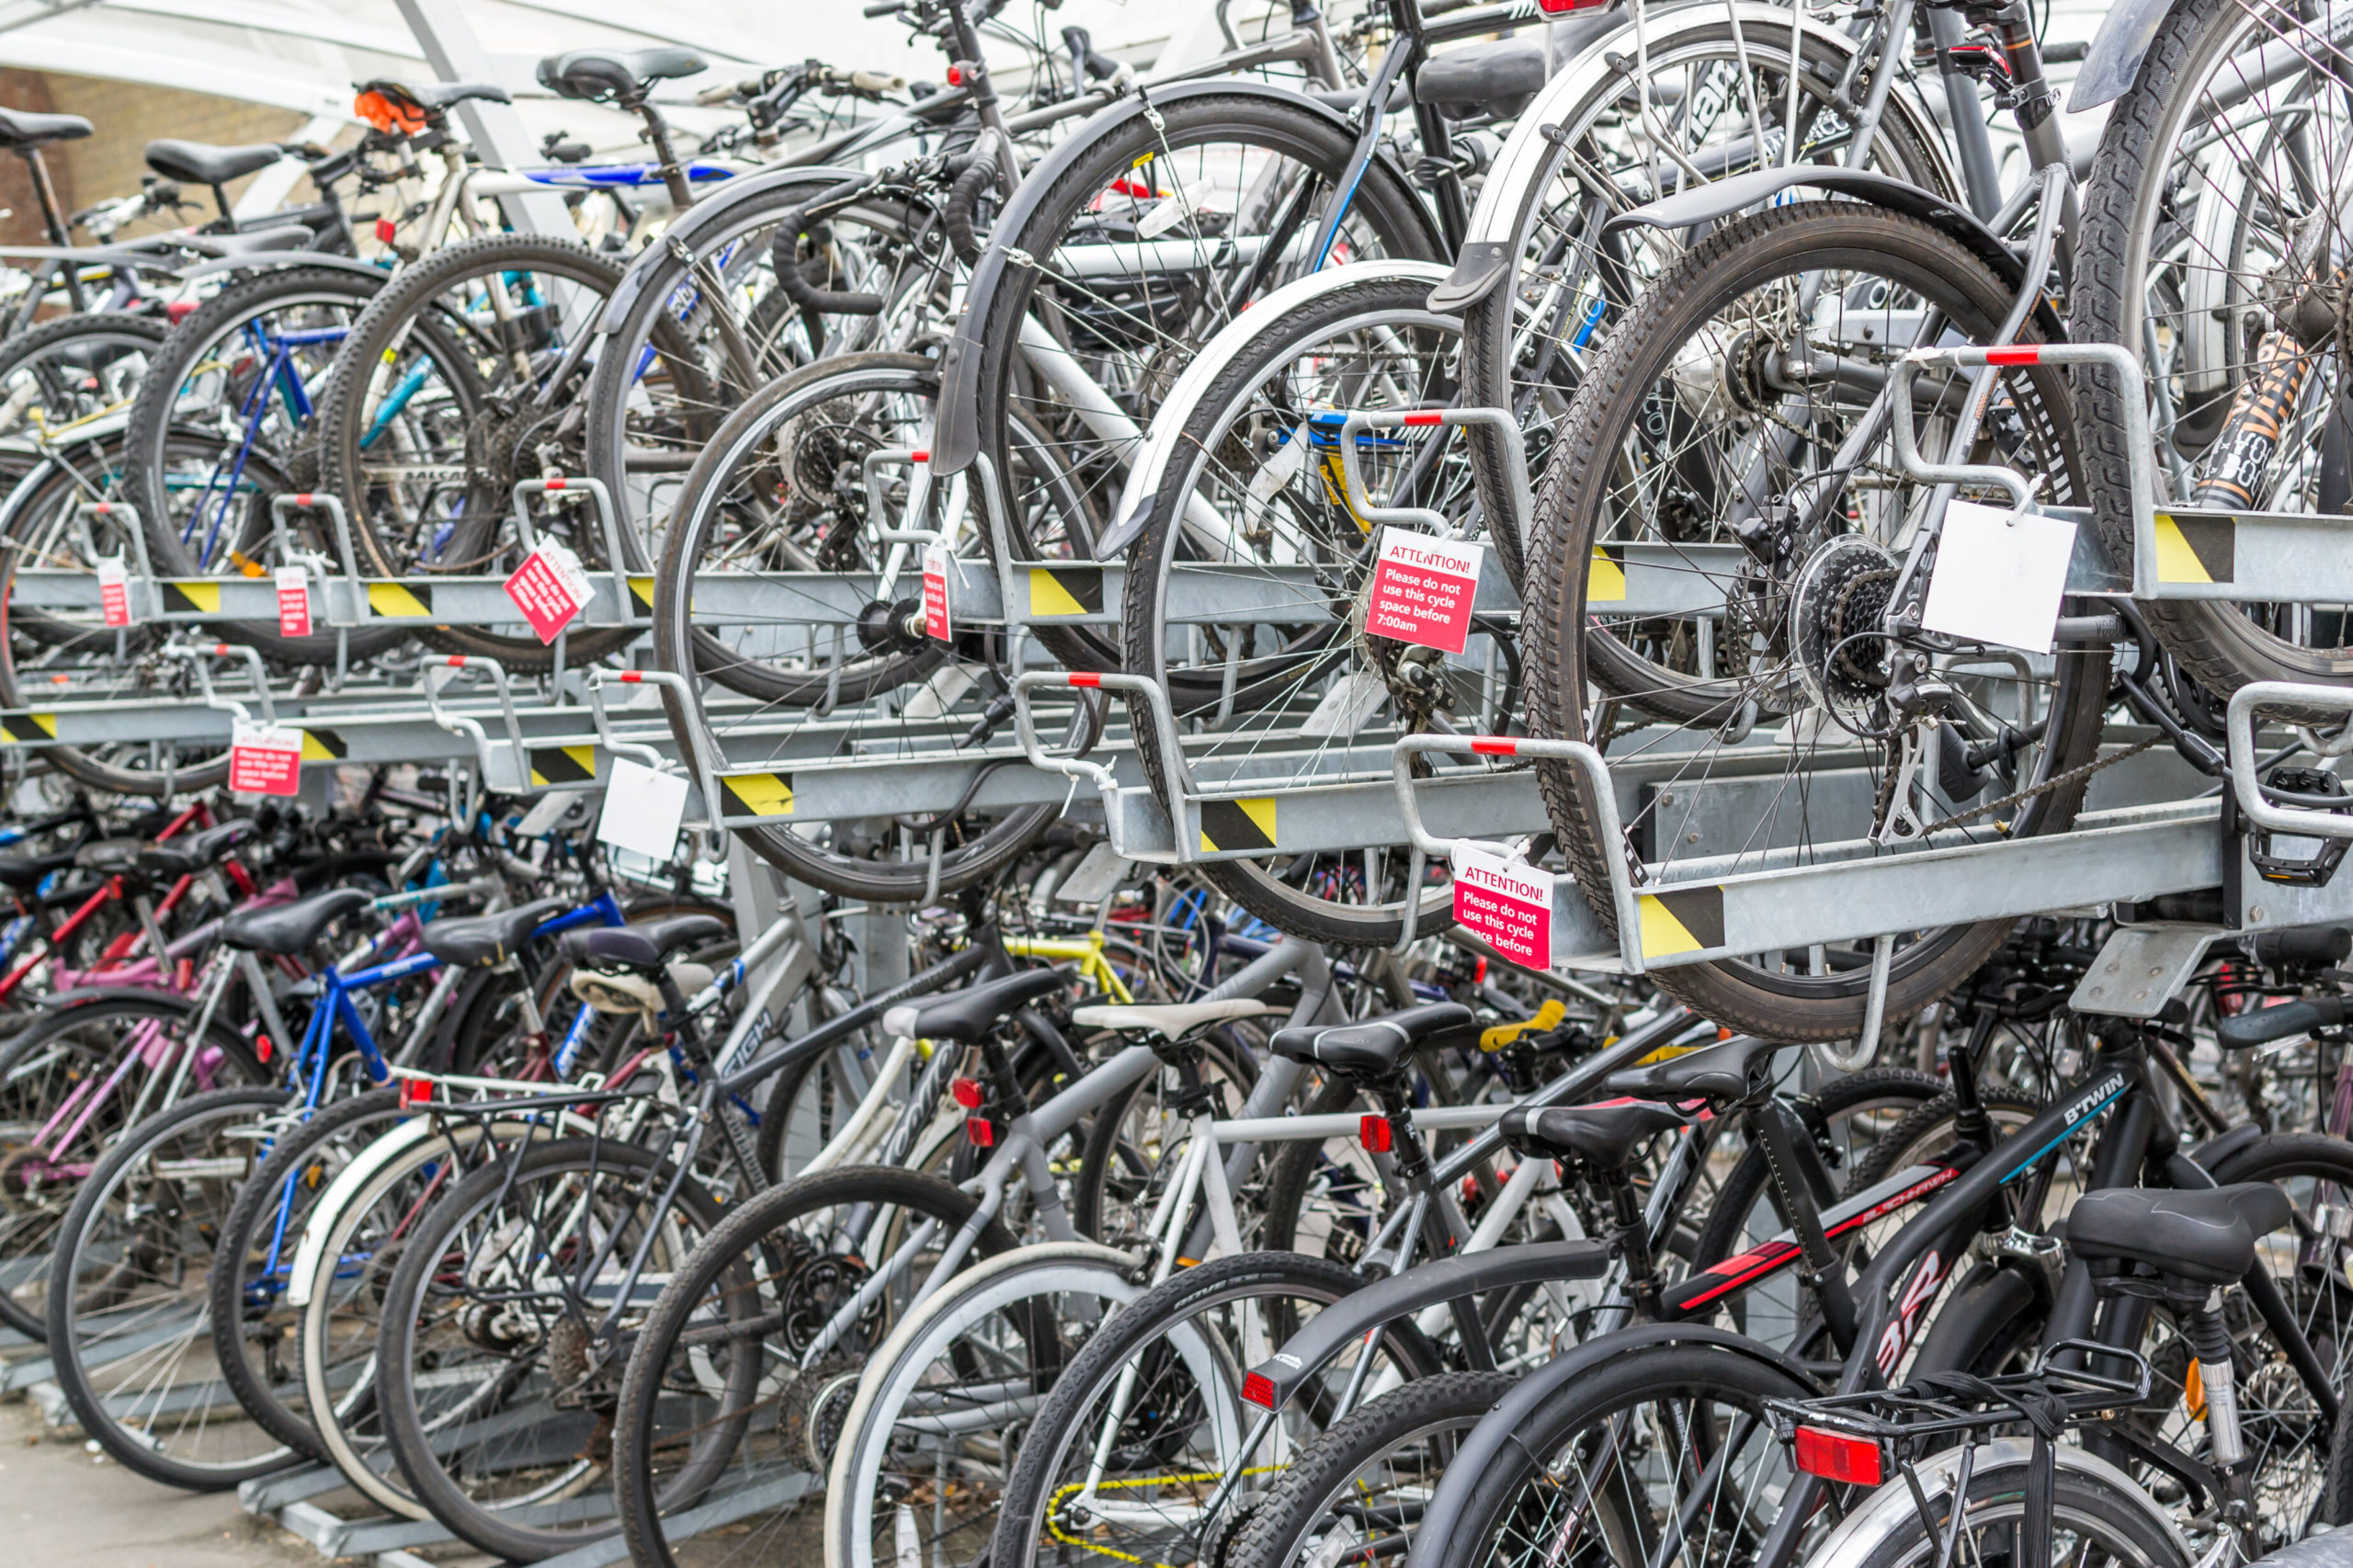 Brussels’ Master Plan for 10 000 bicycle parking spaces detailed